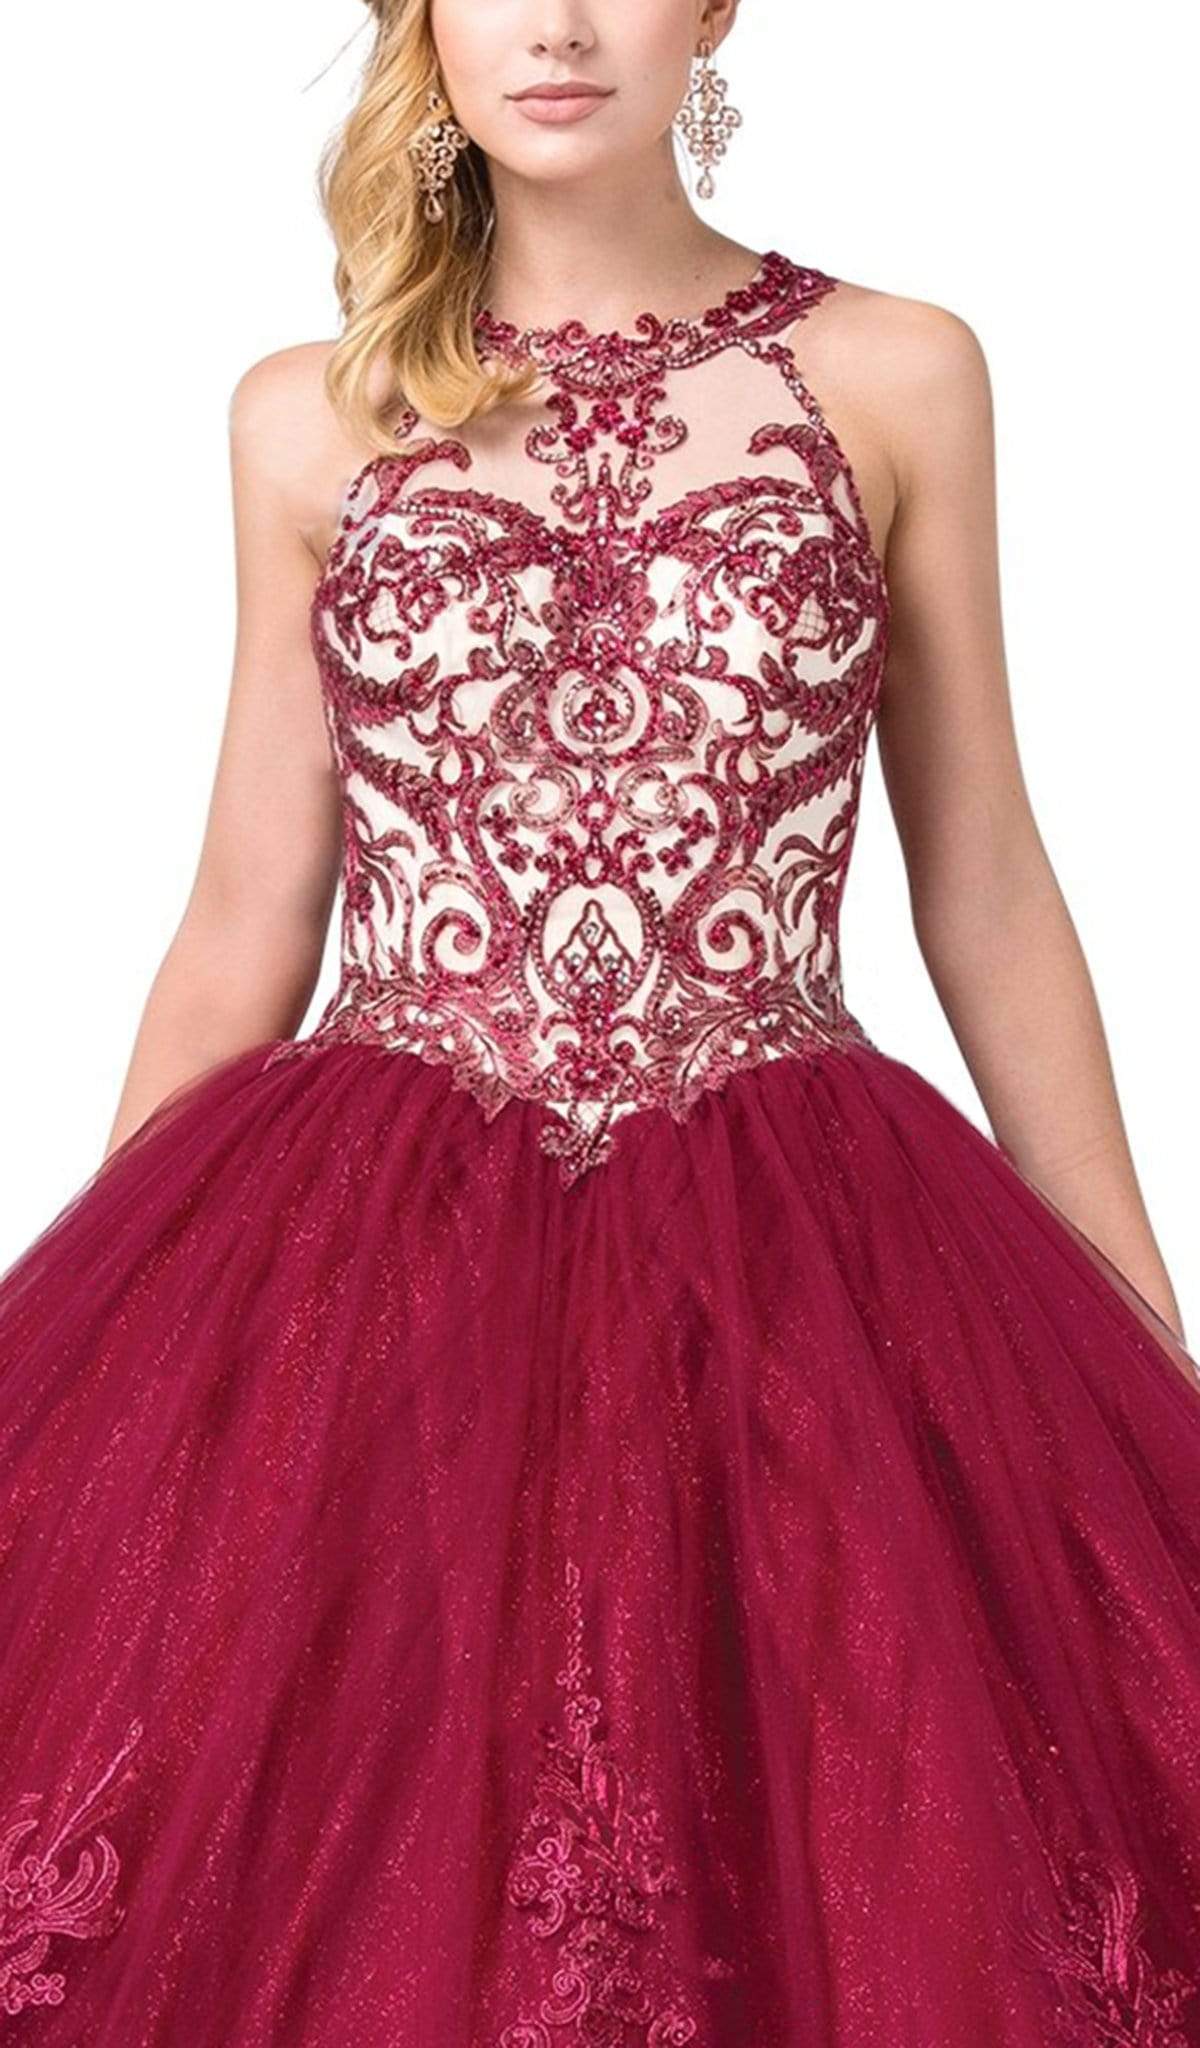 Dancing Queen - 1392 Embroidered Cutout Back Tulle Ballgown Special Occasion Dress